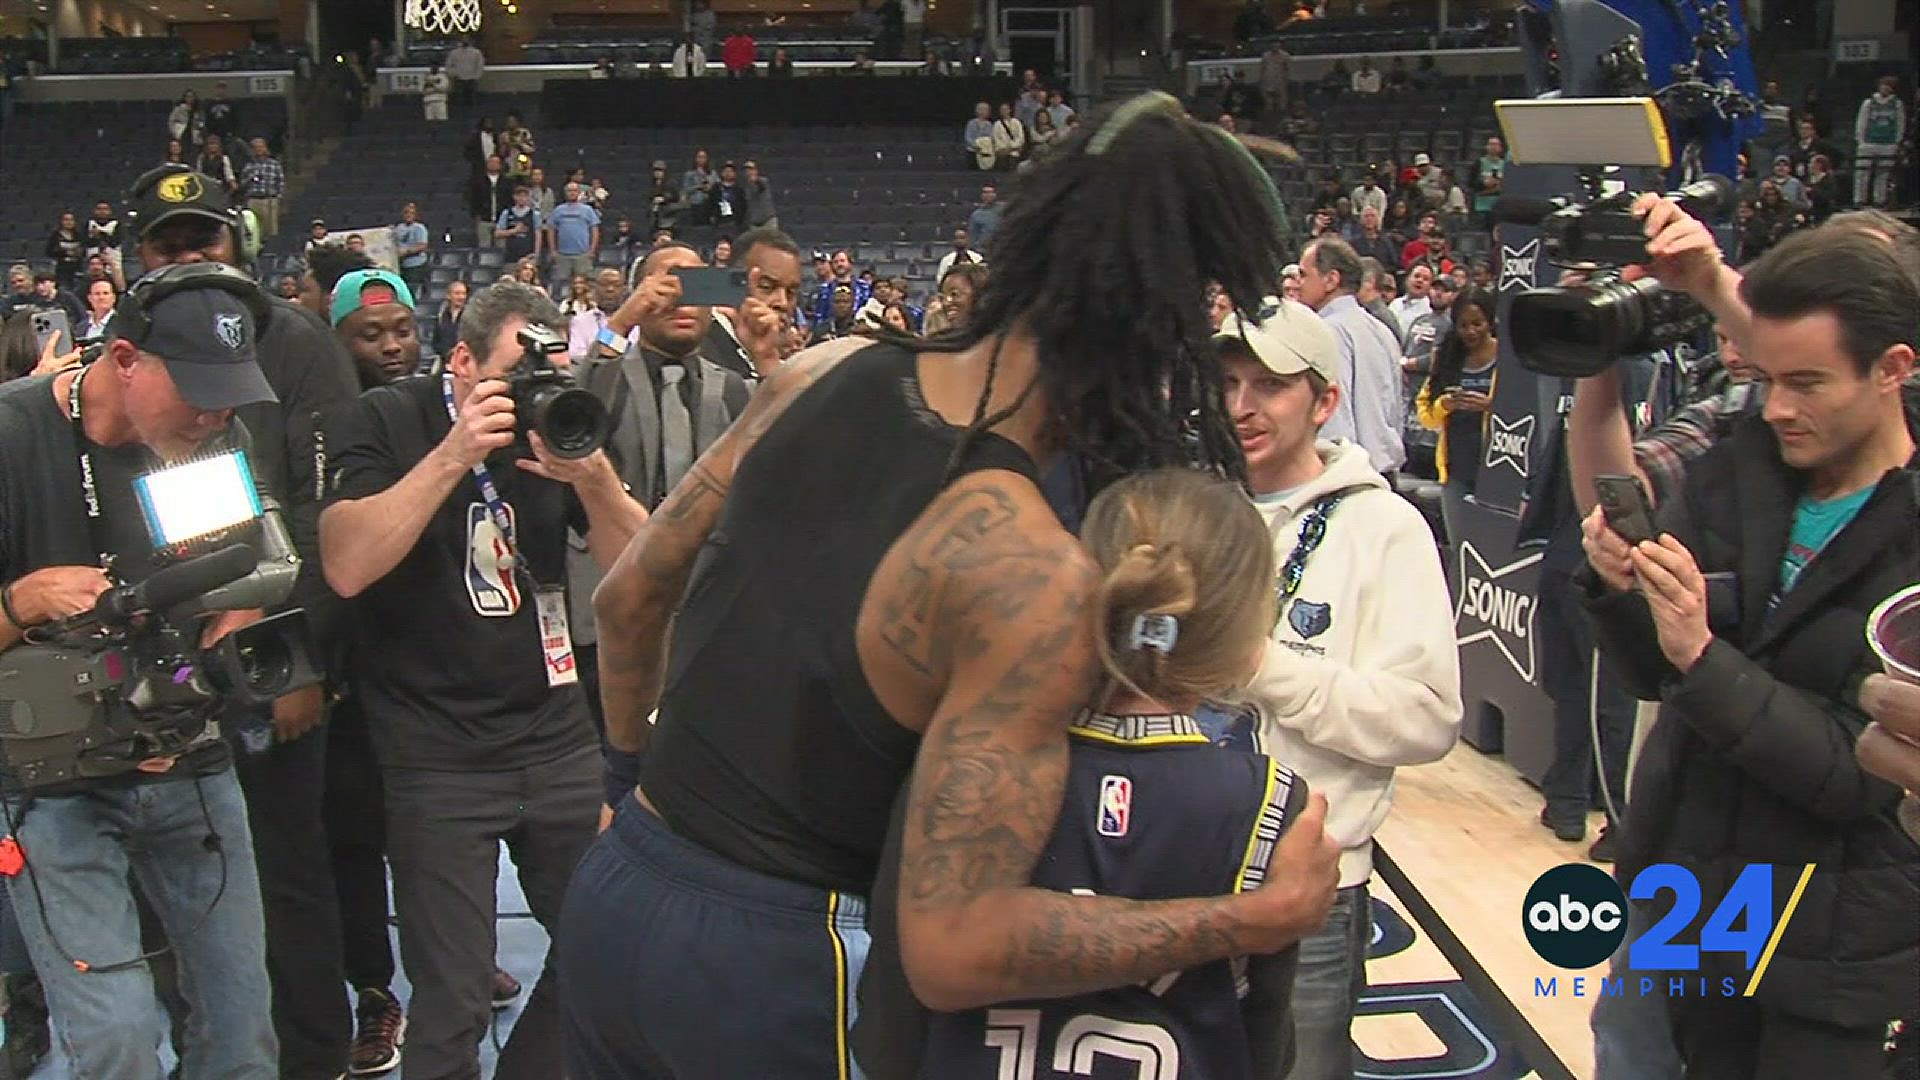 11-year-old Ellie Hughes had a moment she will never forget at Wednesday's Spurs-Grizzlies game